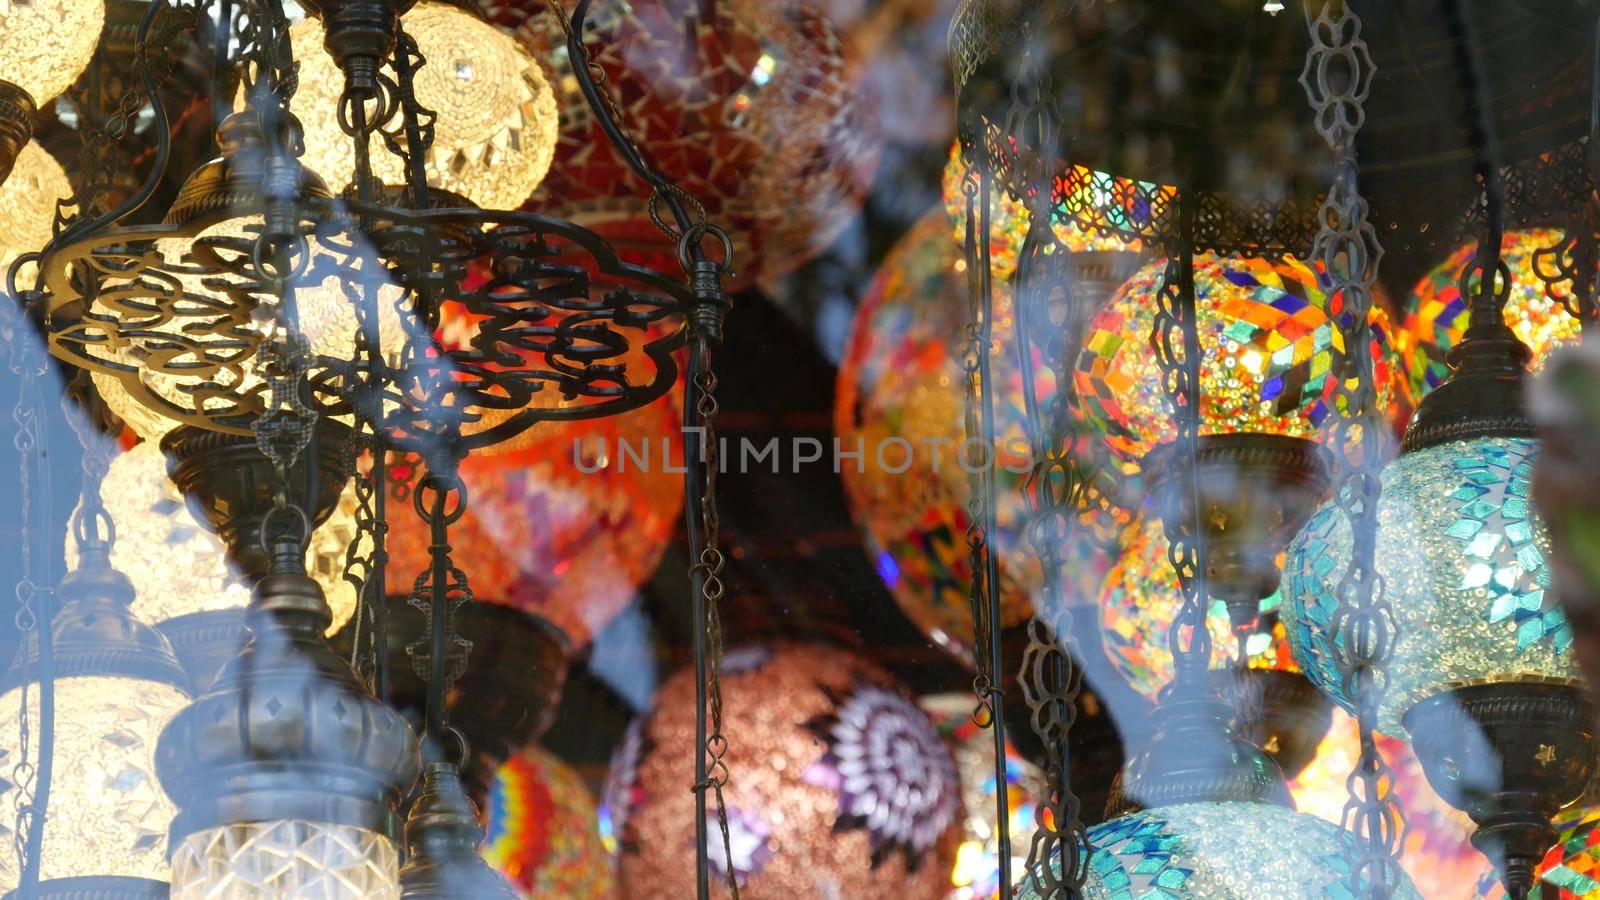 Colourful turkish lamps from glass mosaic glowing. Arabic multi colored authentic retro style lights. Many illuminated moroccan craft lanterns. Oriental islamic middle eastern decor. Shiny folk shop.